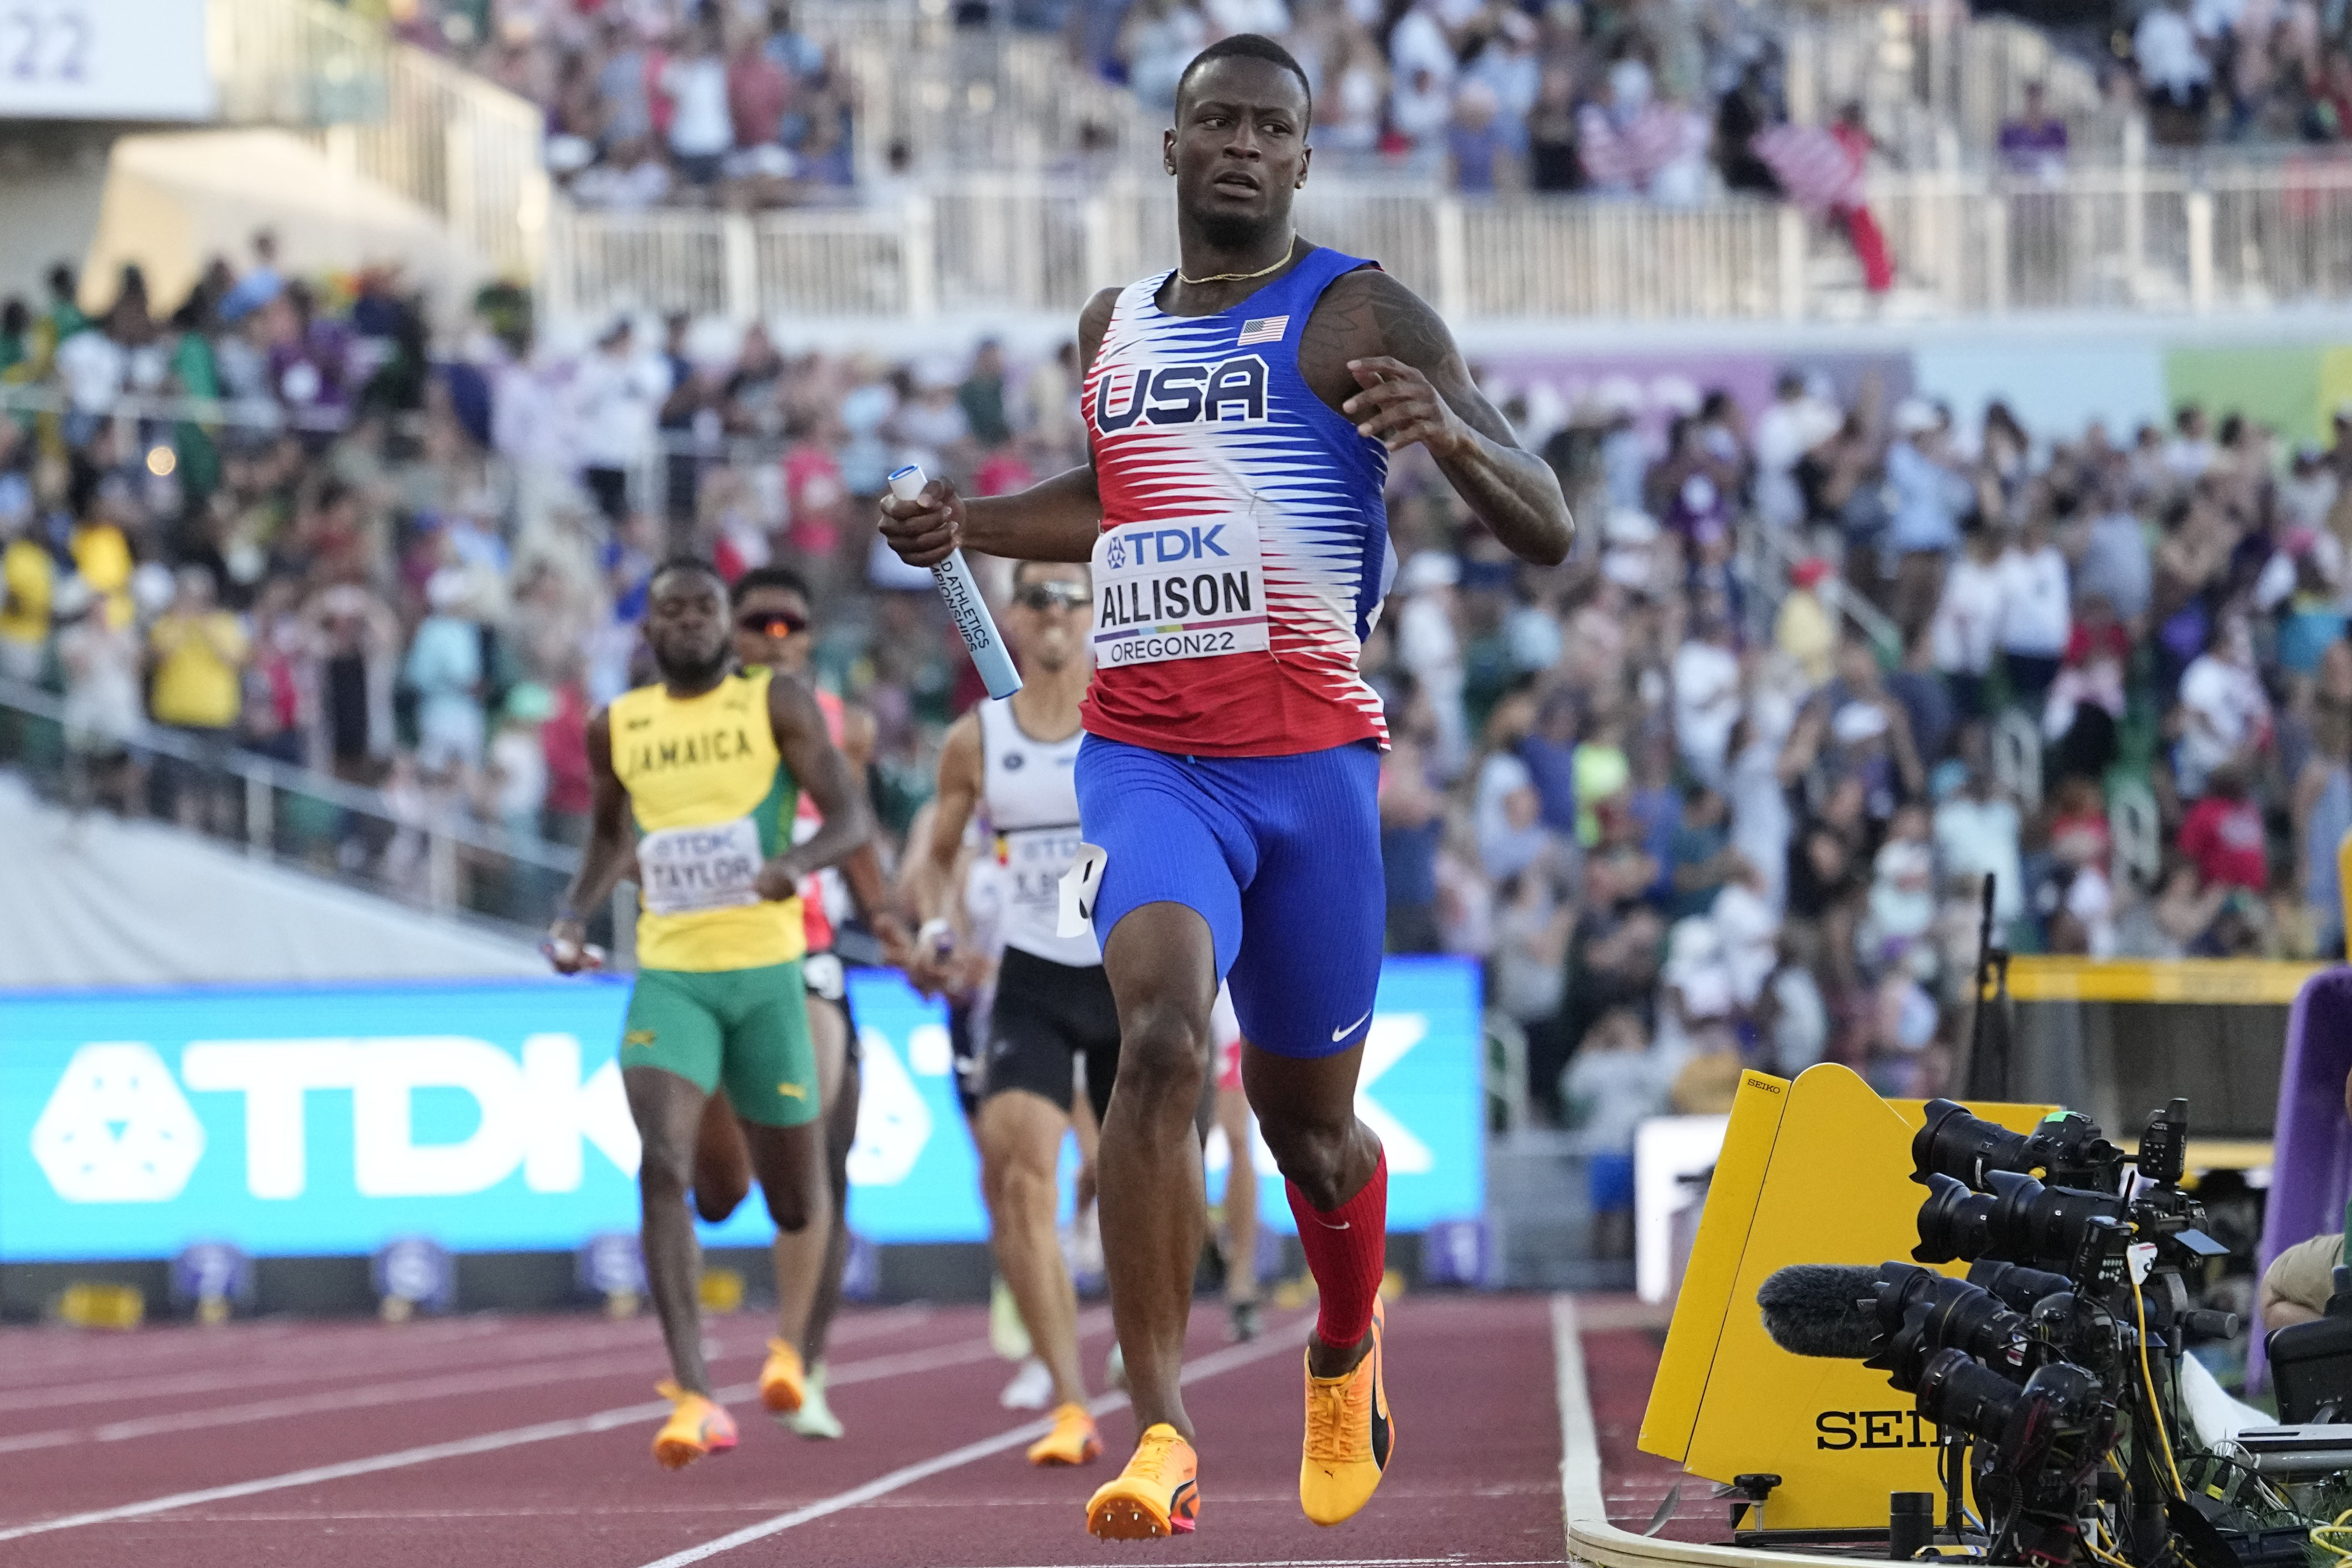 Gators Diggs, Allison win gold on final day of Track and Field World  Championships